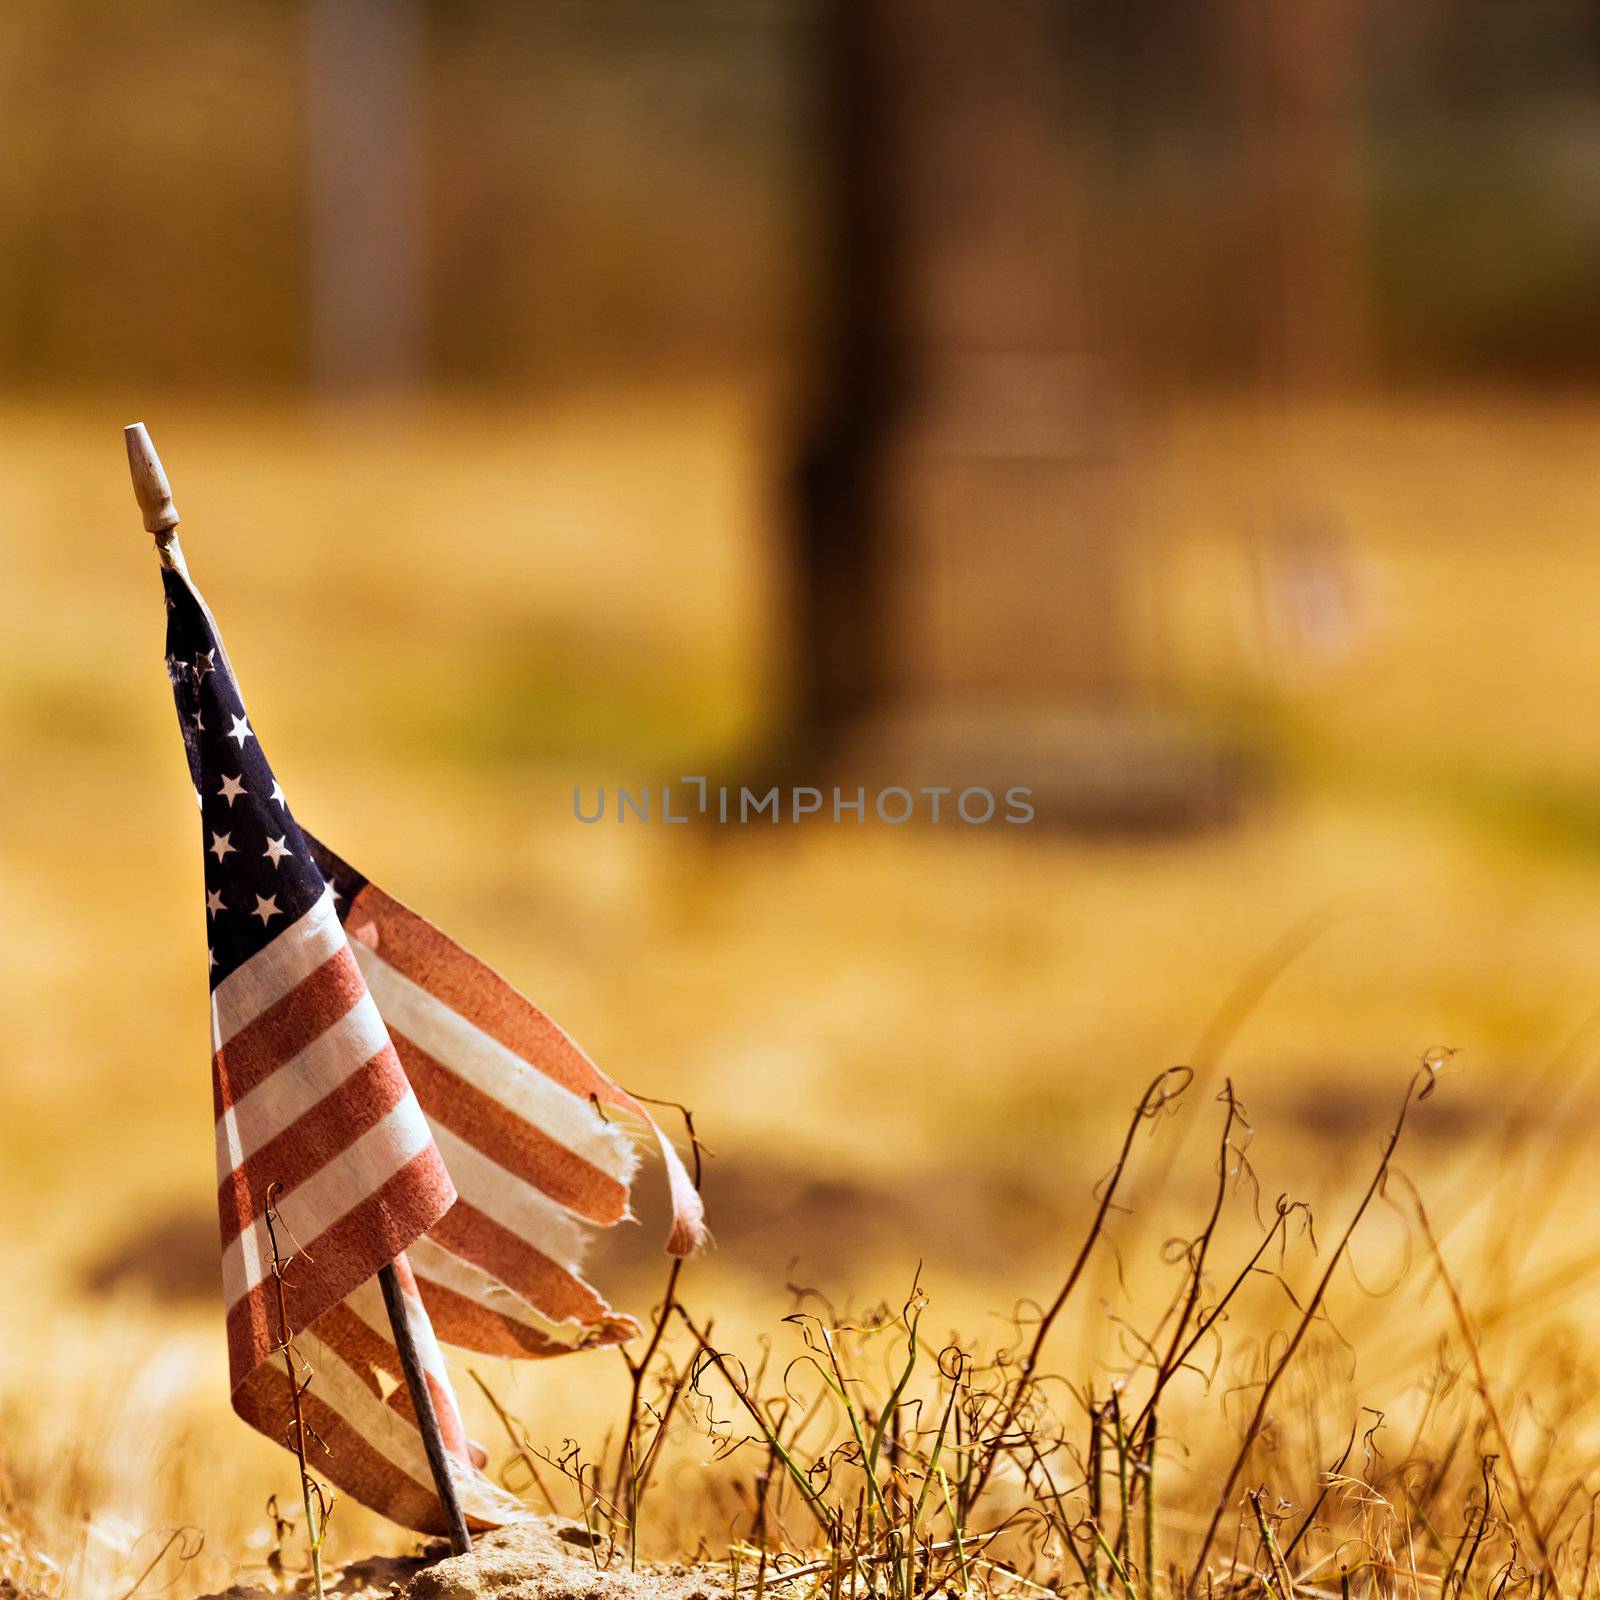 Worn out american flag against a dried out field background.